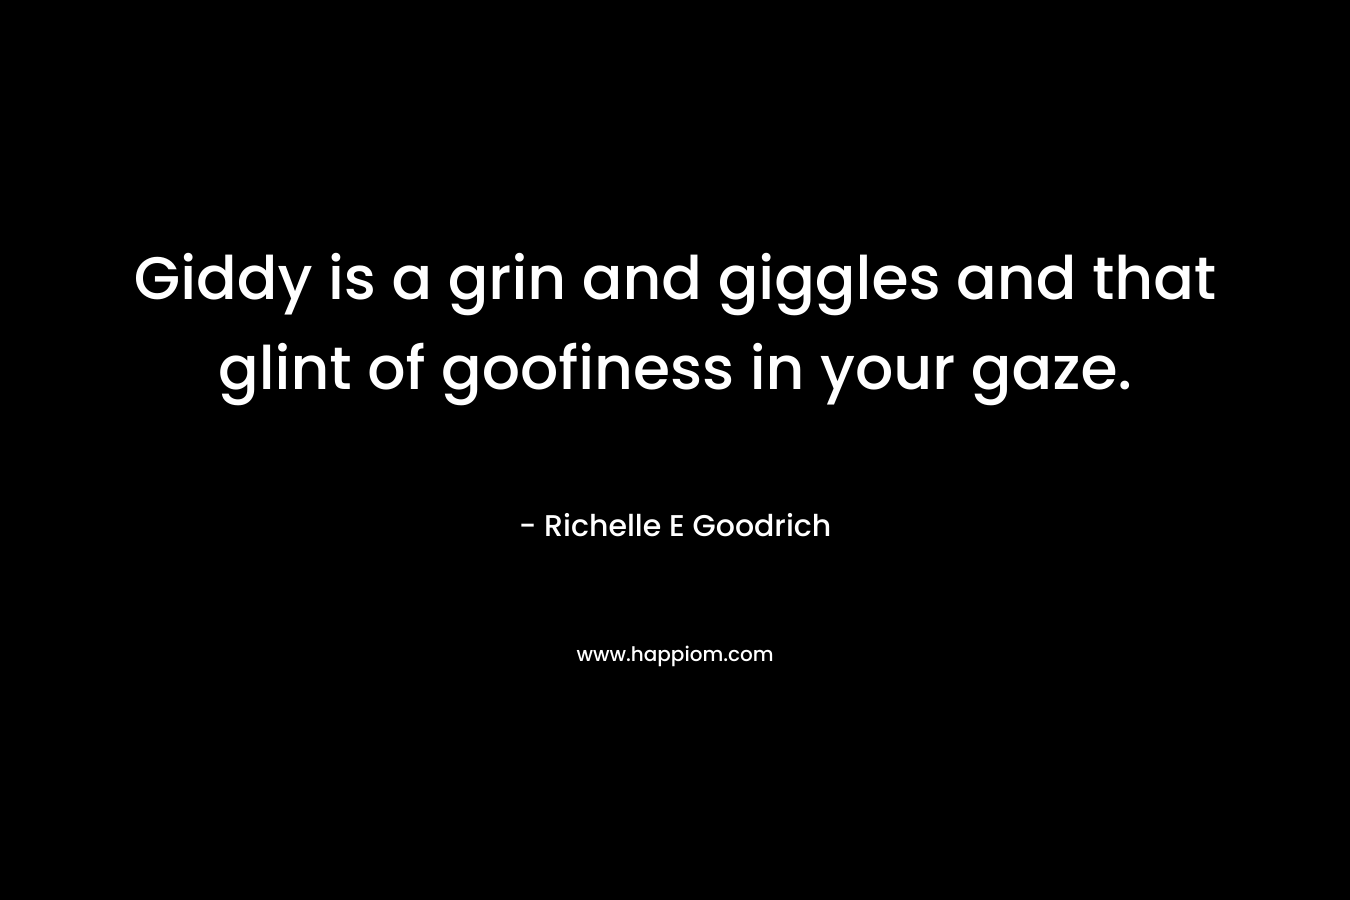 Giddy is a grin and giggles and that glint of goofiness in your gaze. – Richelle E Goodrich